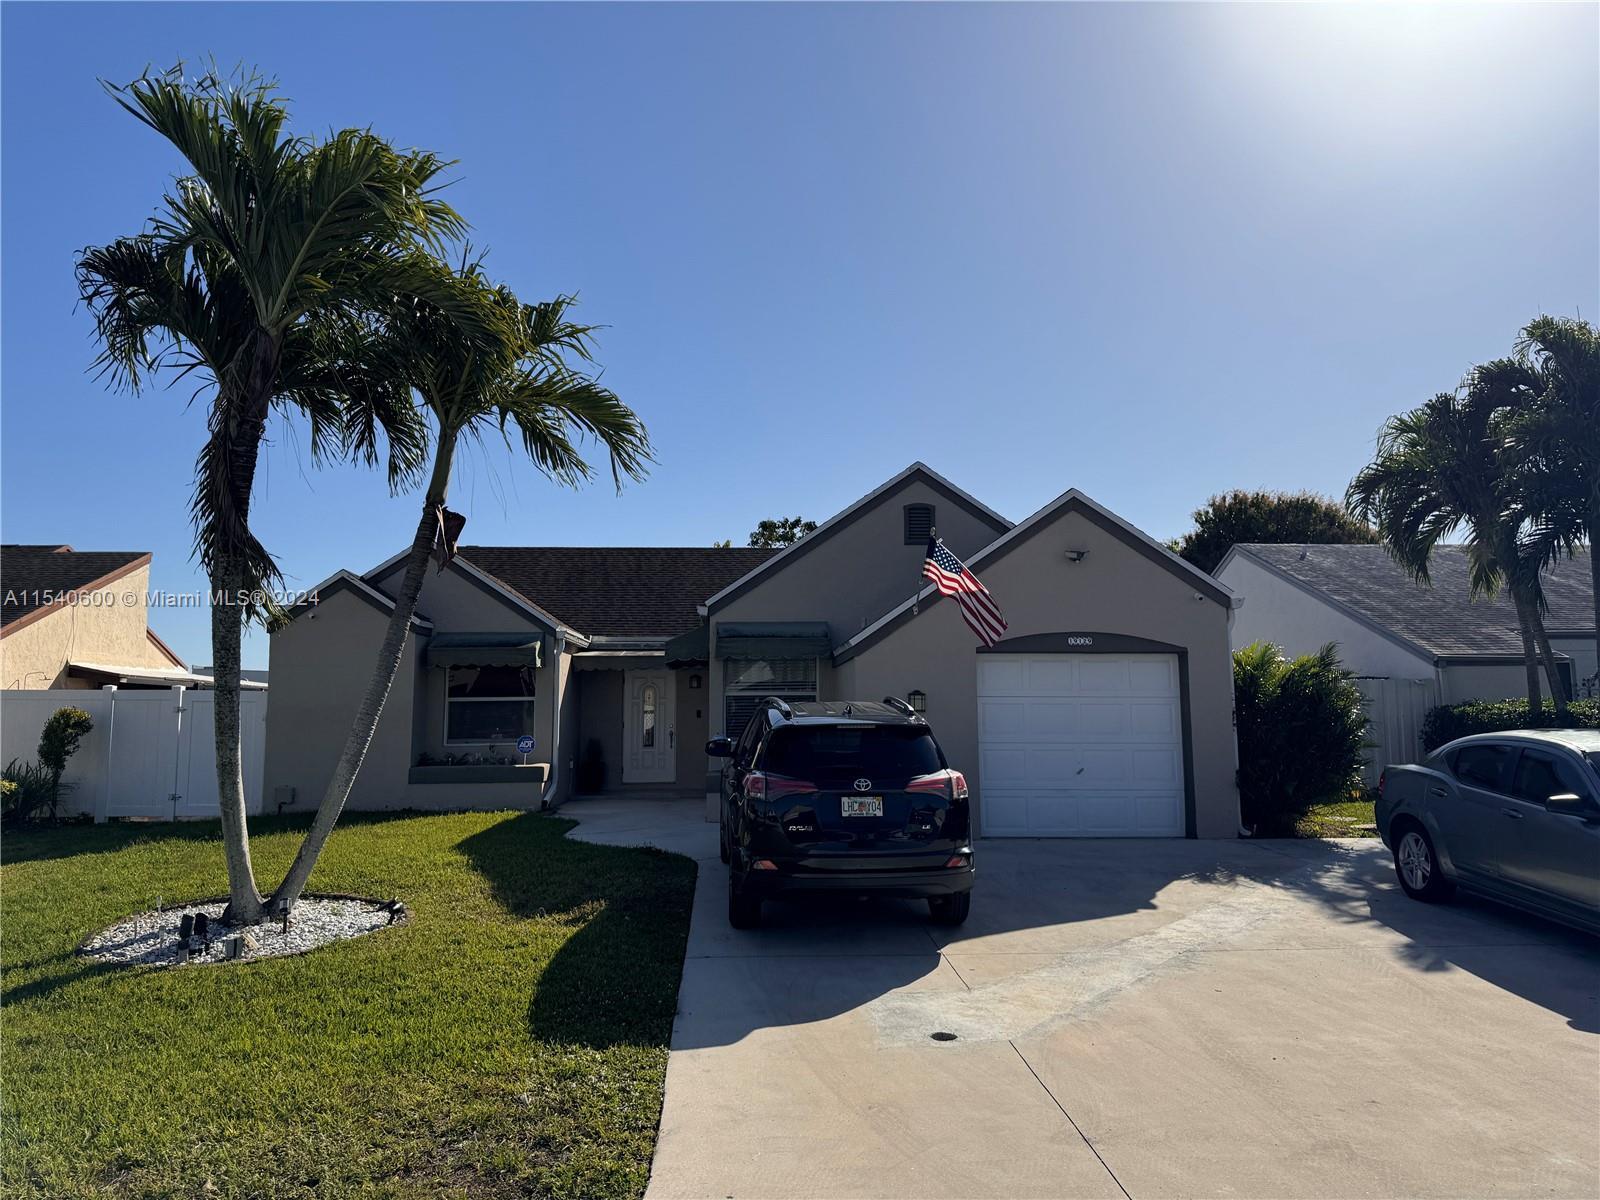 Photo of 19129 NW 80th Ct in Hialeah, FL